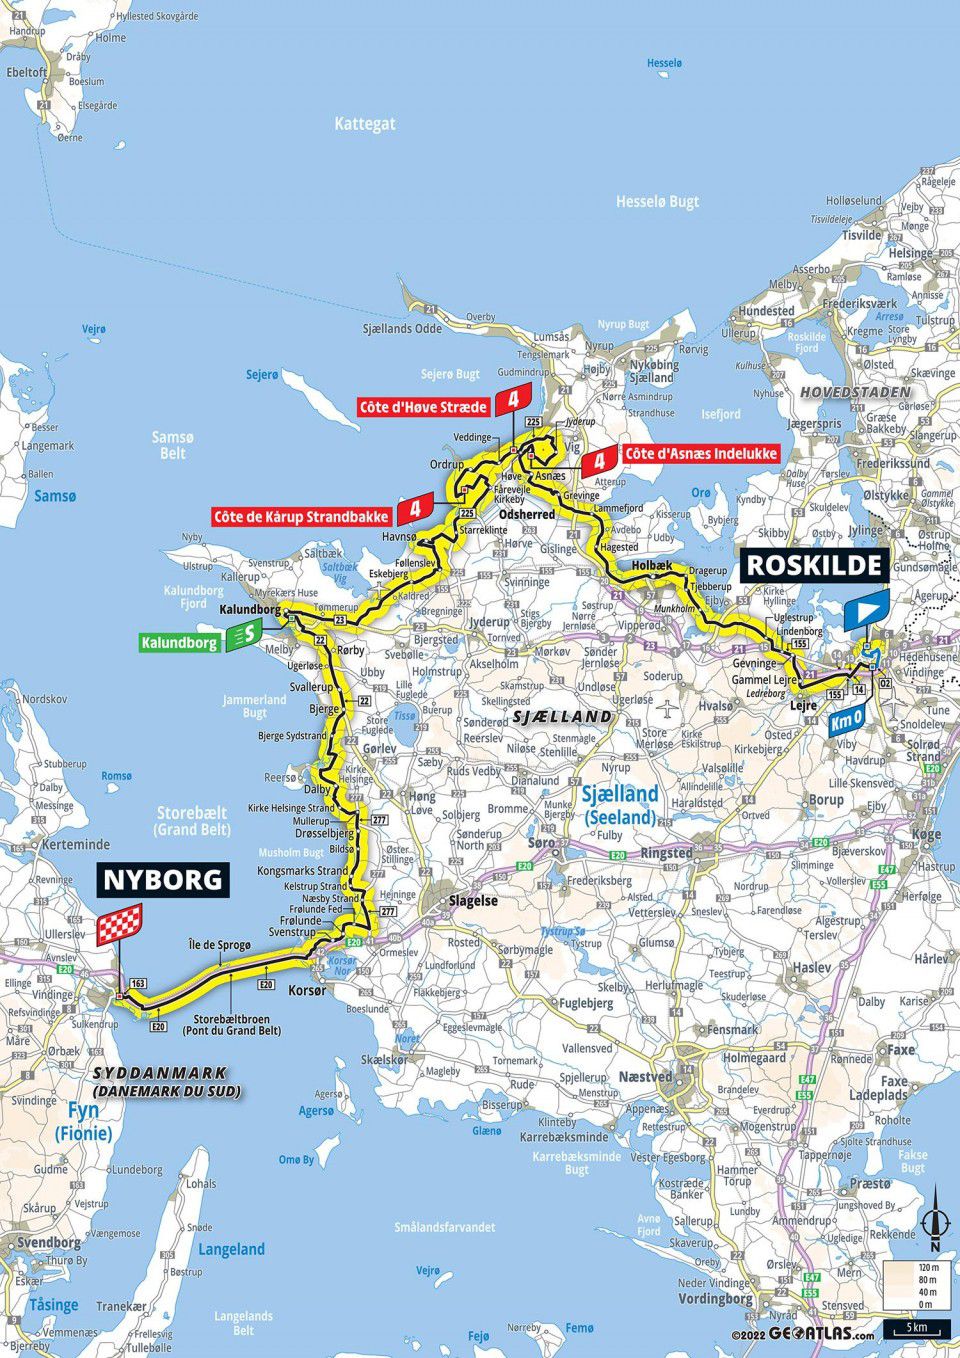 Maps of Stage 2 of the Tour de France from Roskilde to Nyborg in Denmark.